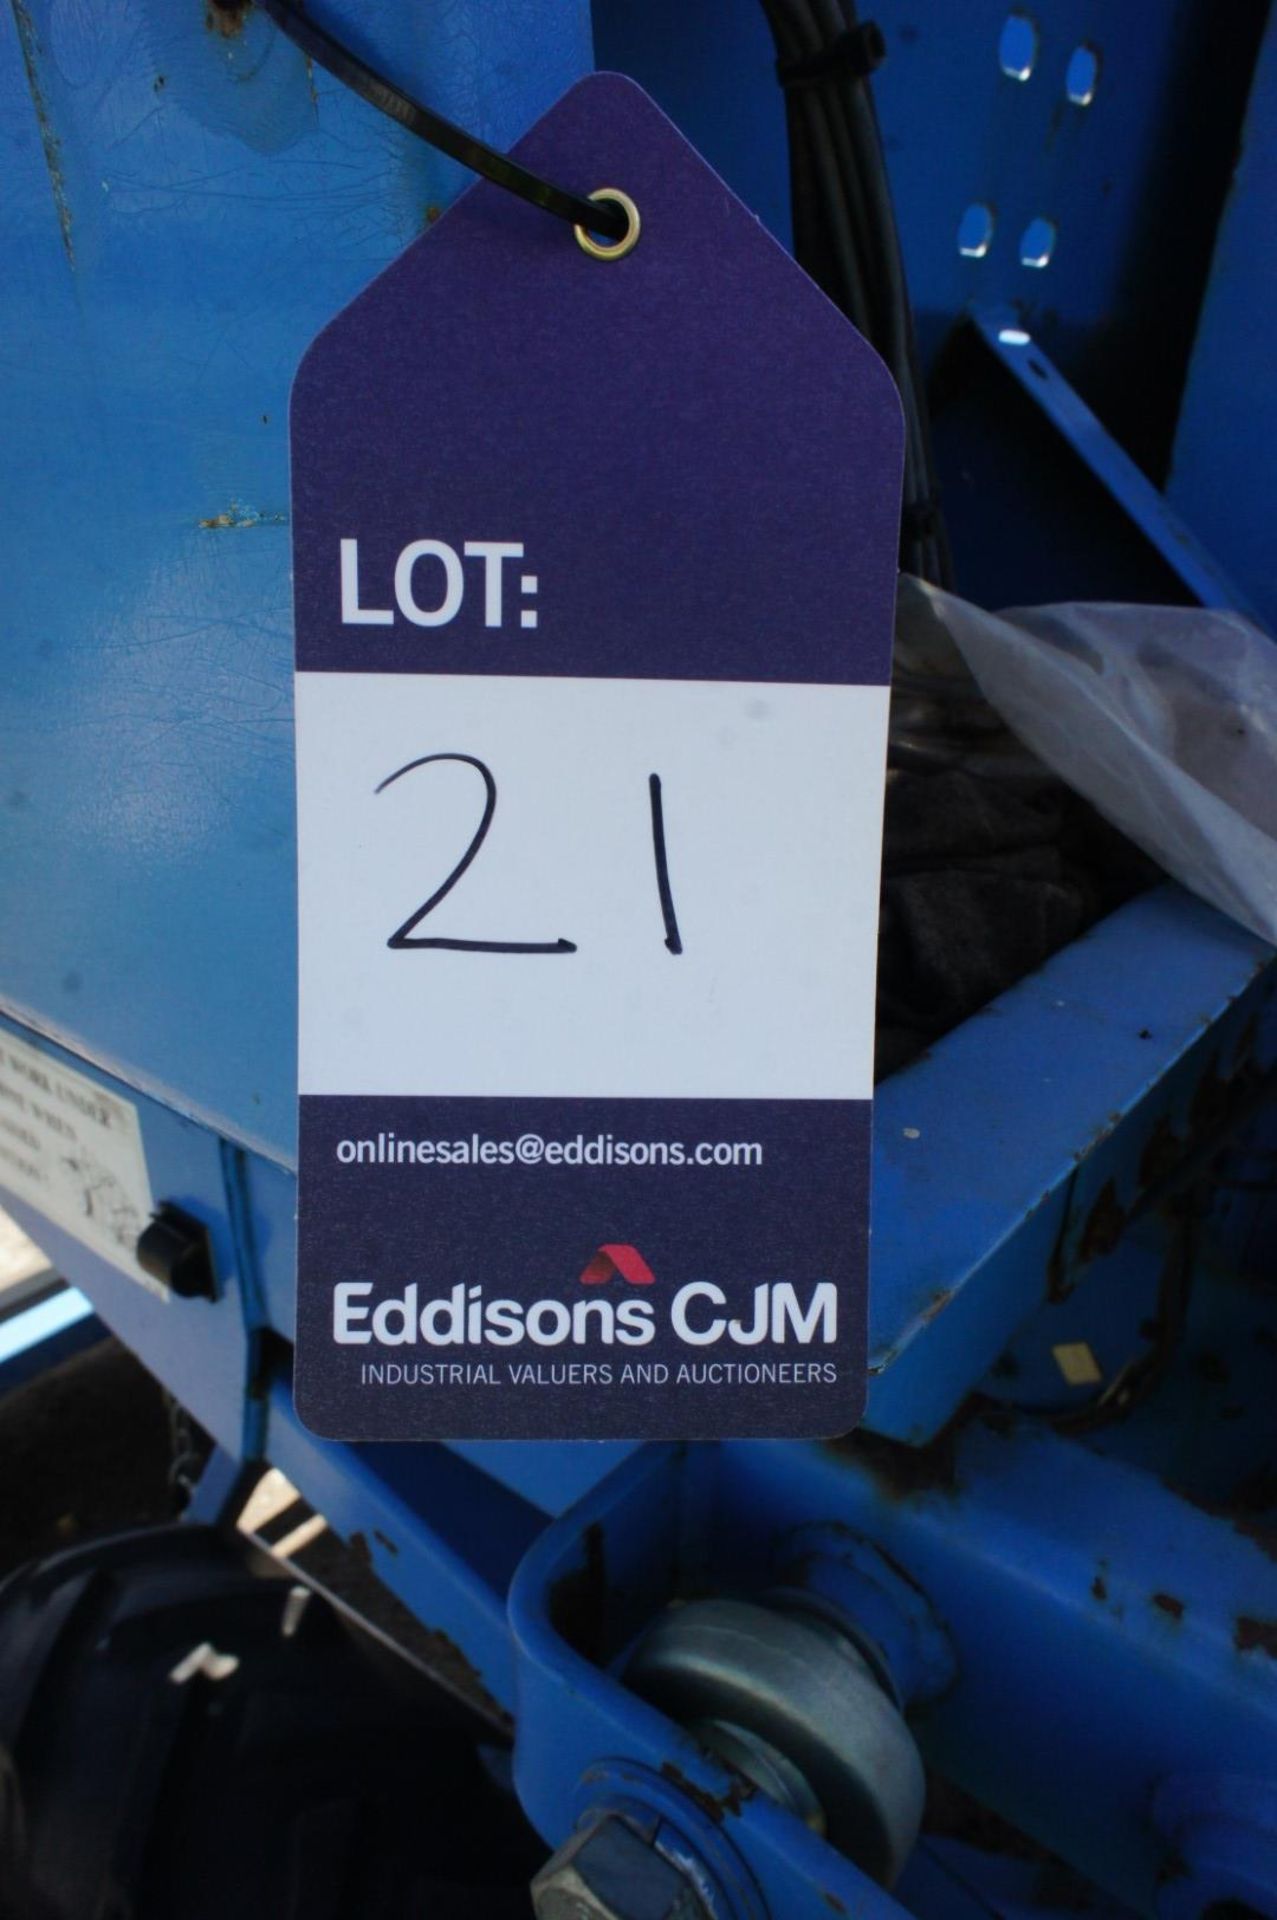 Standen Pearson BB3 (SP300), 3 Row Potato Planter, Serial Number 678, Year 2012 - Image 5 of 8